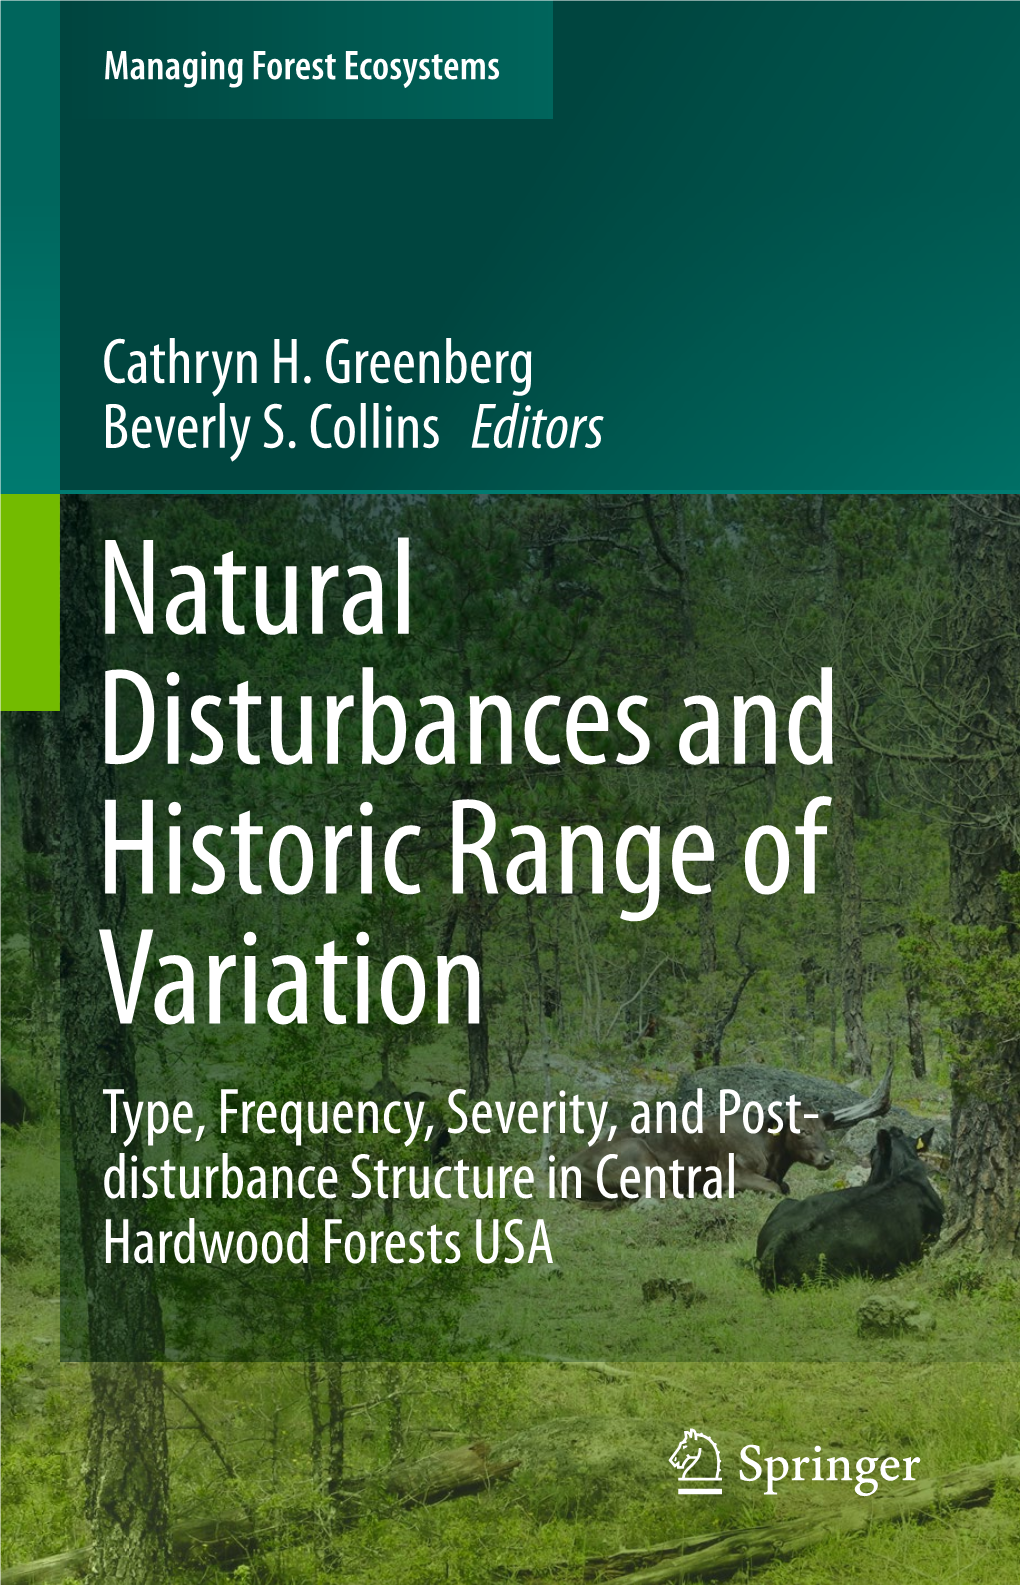 Ice Storms in Central Hardwood Forests: the Disturbance Regime, Spatial Patterns, and Vegetation Influences